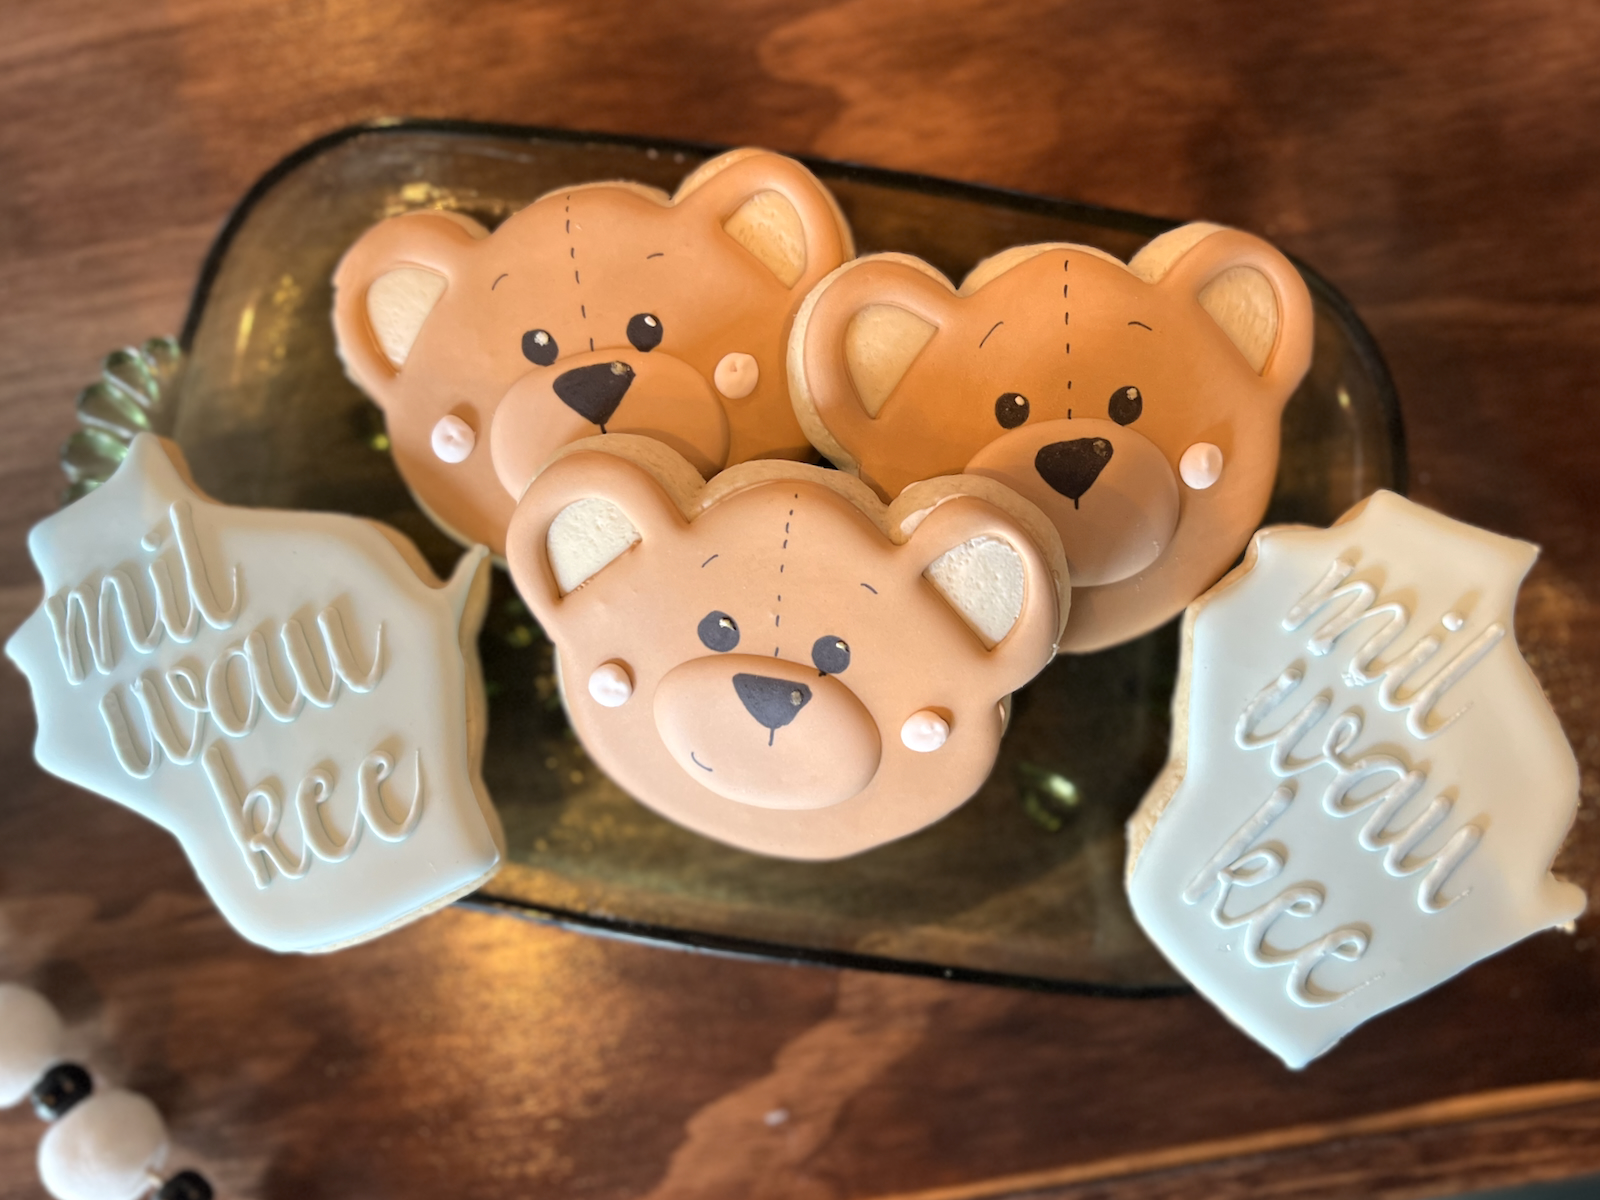 Decorated sugar cookies from Lucy Bakes